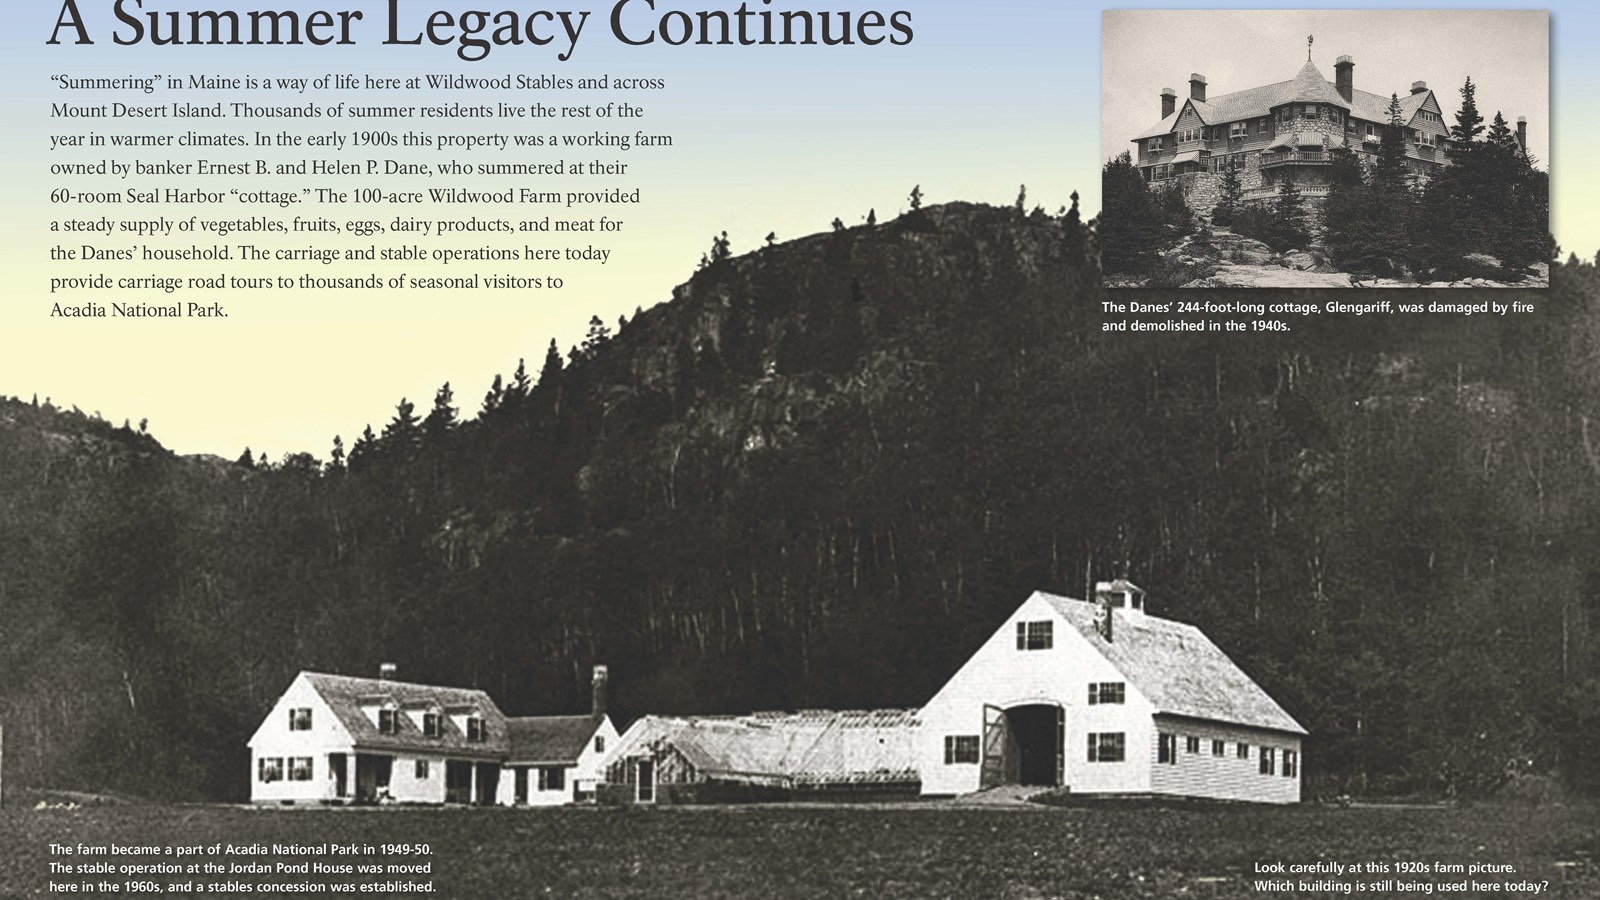 Title: A Summer Legacy Continues in bold; background image of historic white farm.